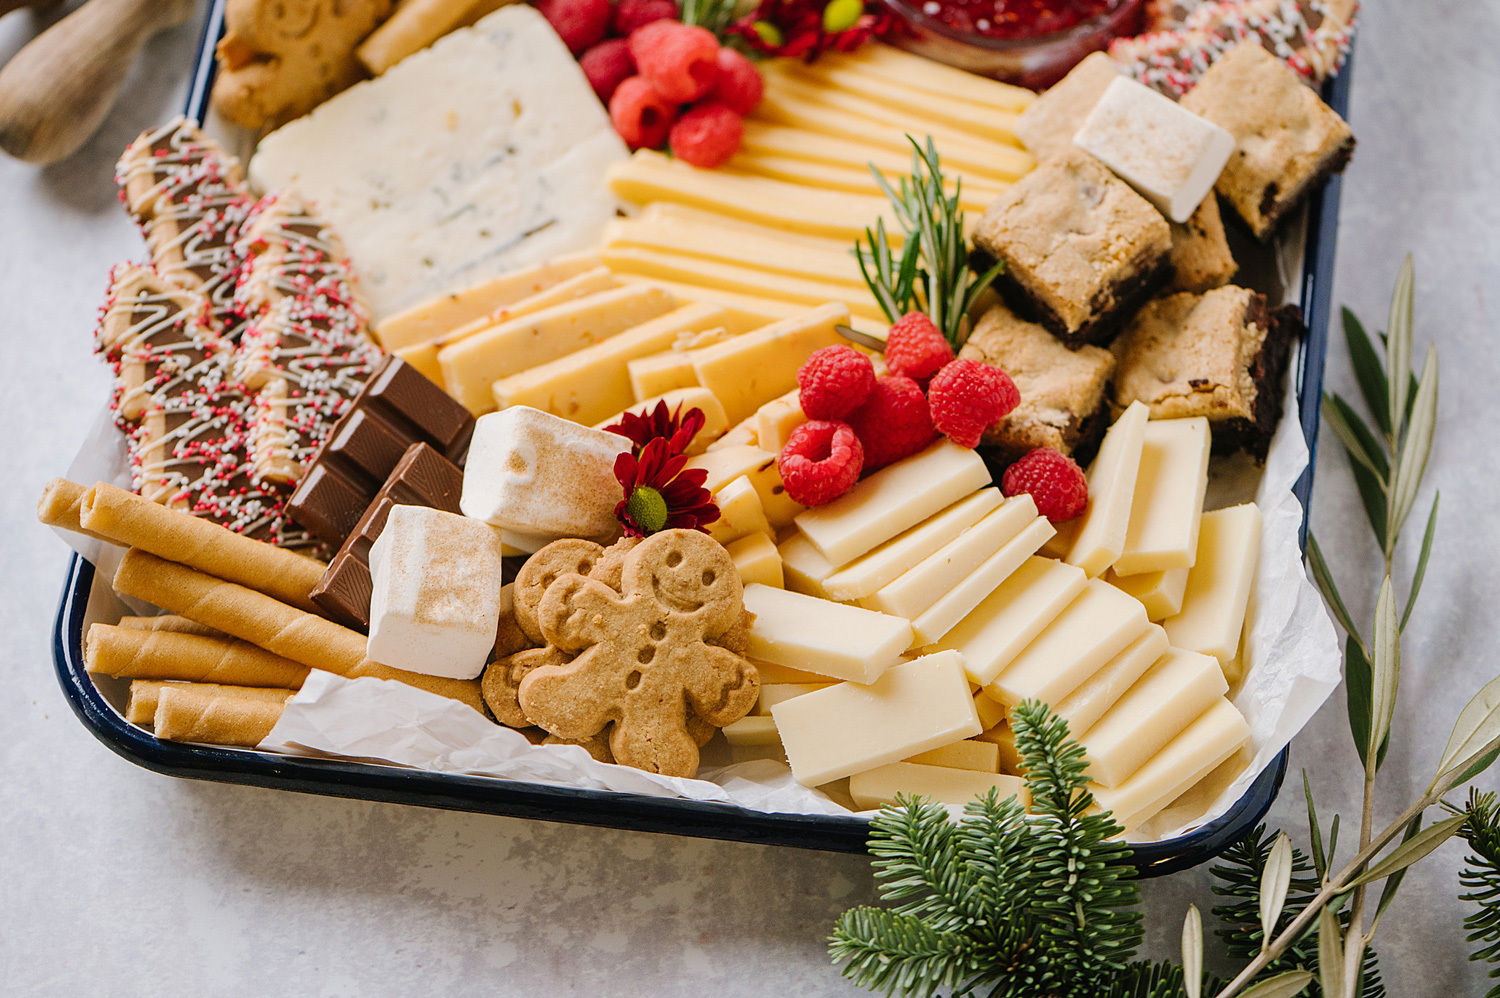 https://www.rothcheese.com/wp-content/uploads/2021/12/roth-holiday-cheeseboard-13.jpg